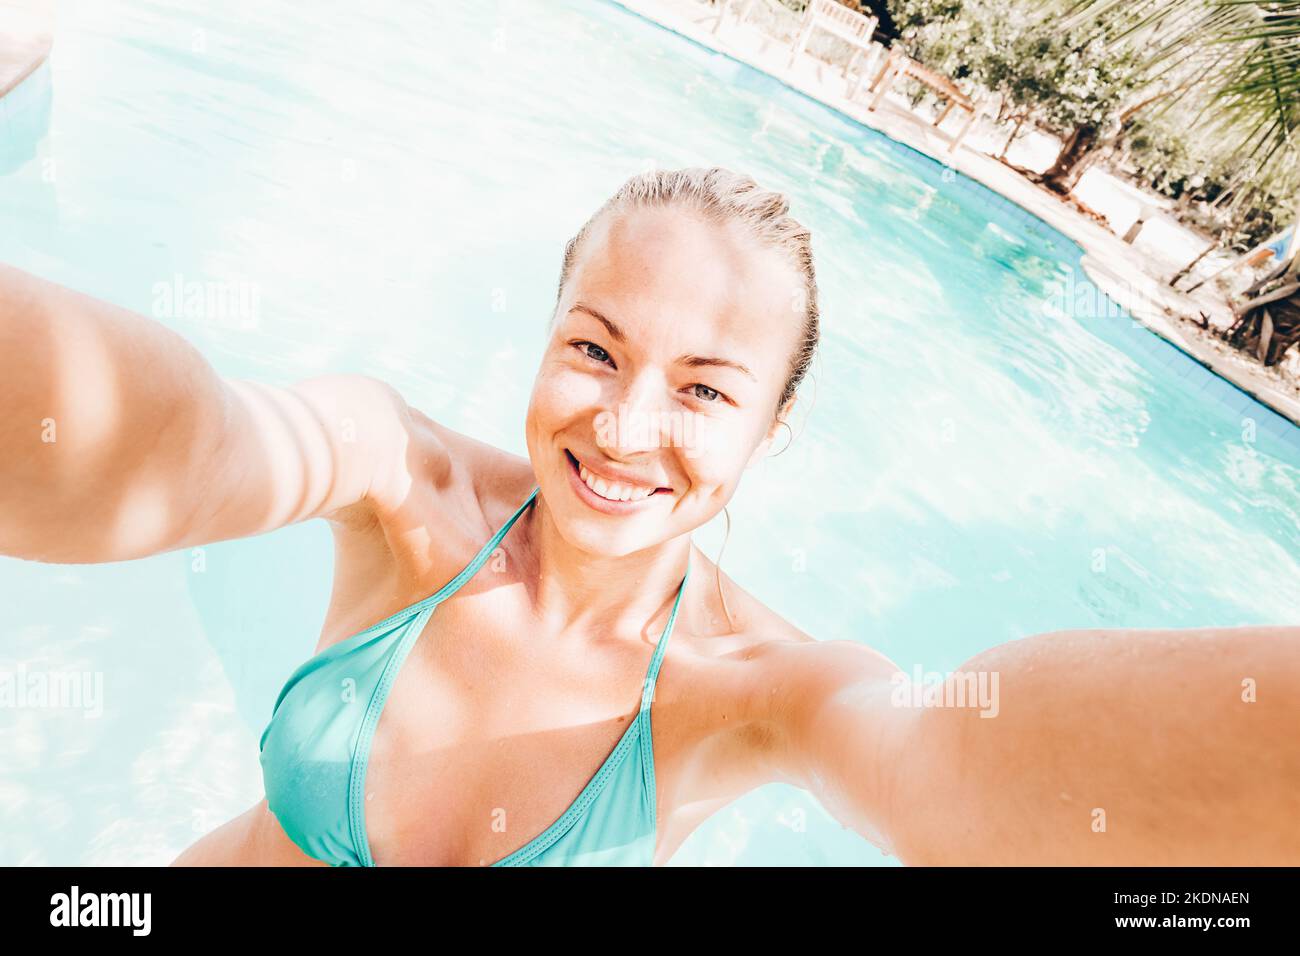 Lady taking a selfie at resorts poolside on summer vacations. Holidays and vacations. Stock Photo